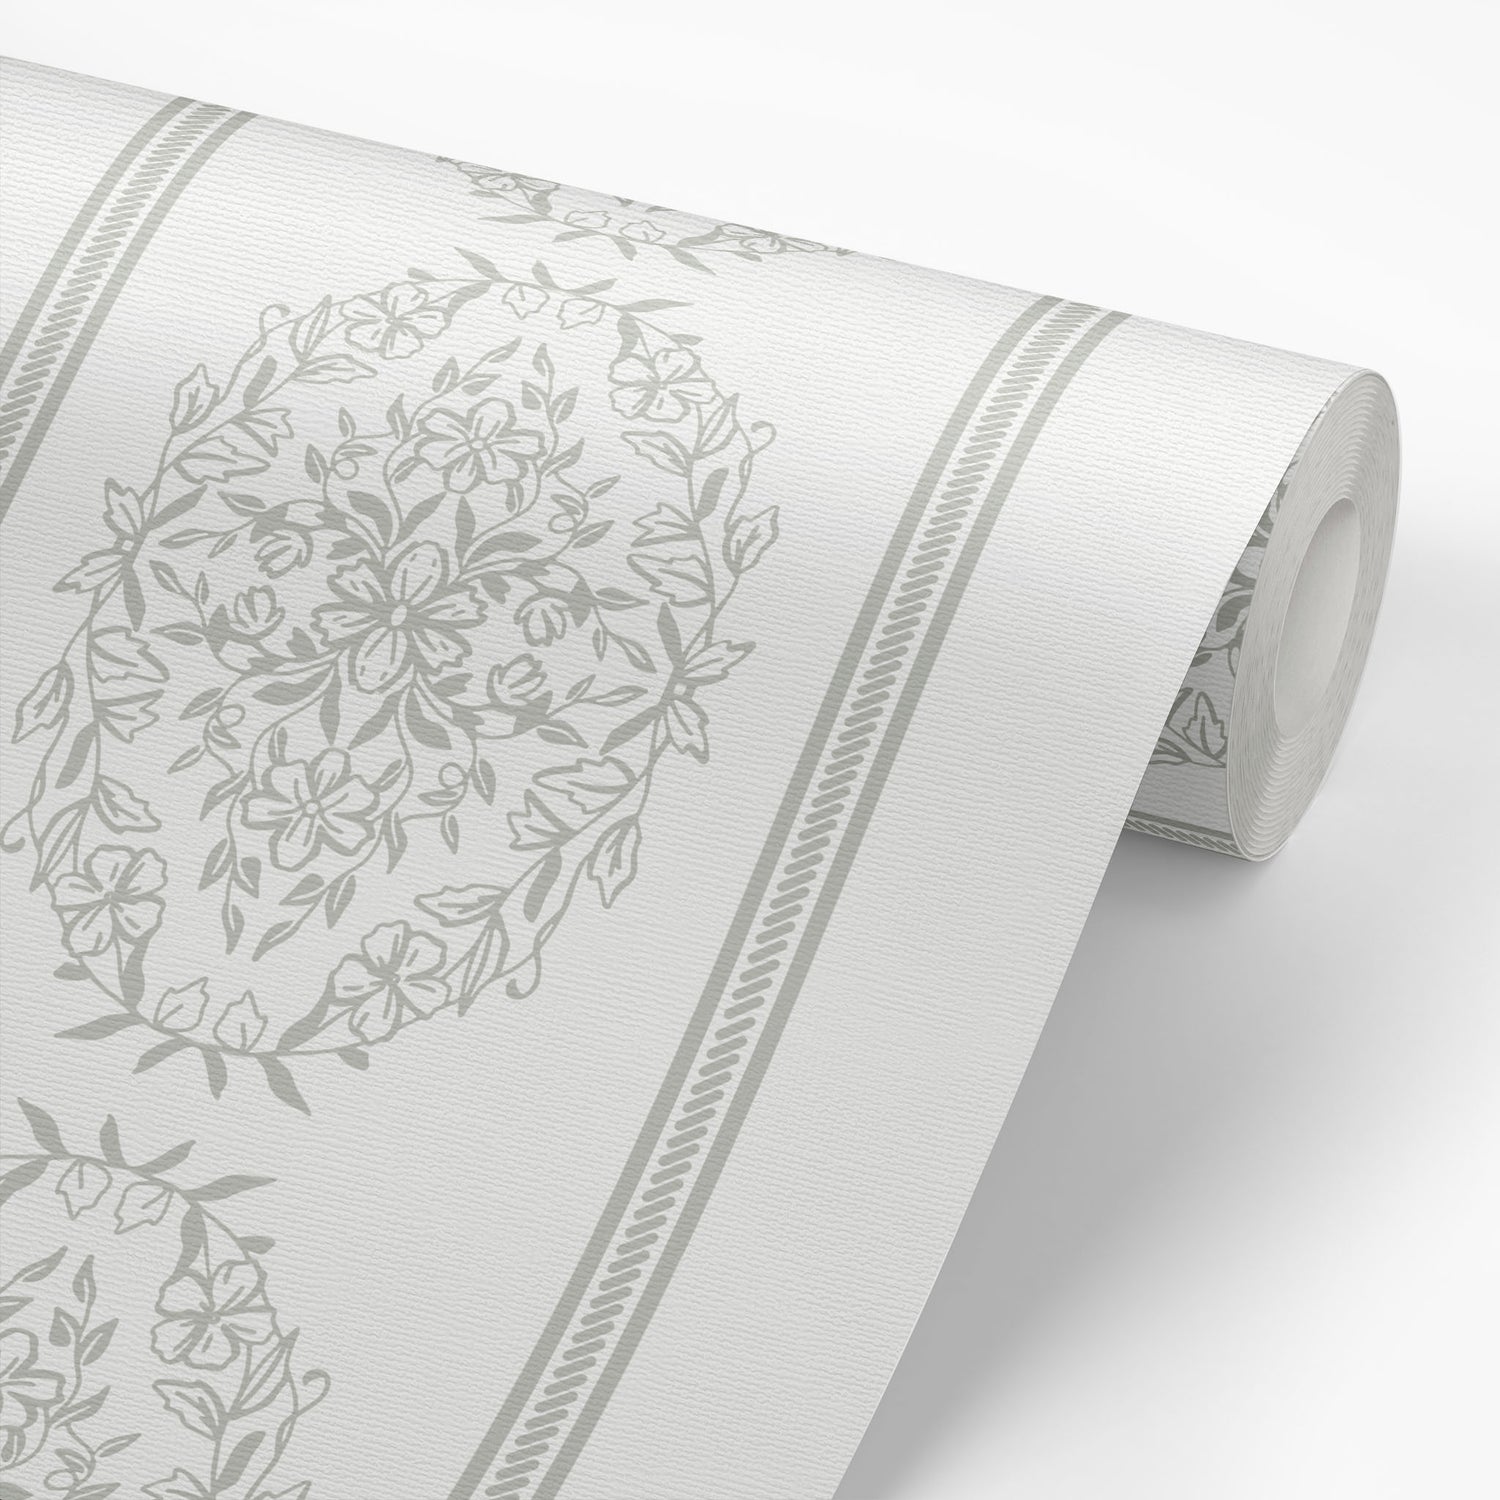 Made with top-quality materials, this wallpaper is the perfect choice for adding a touch of elegance to your space shown on a wallpaper roll.